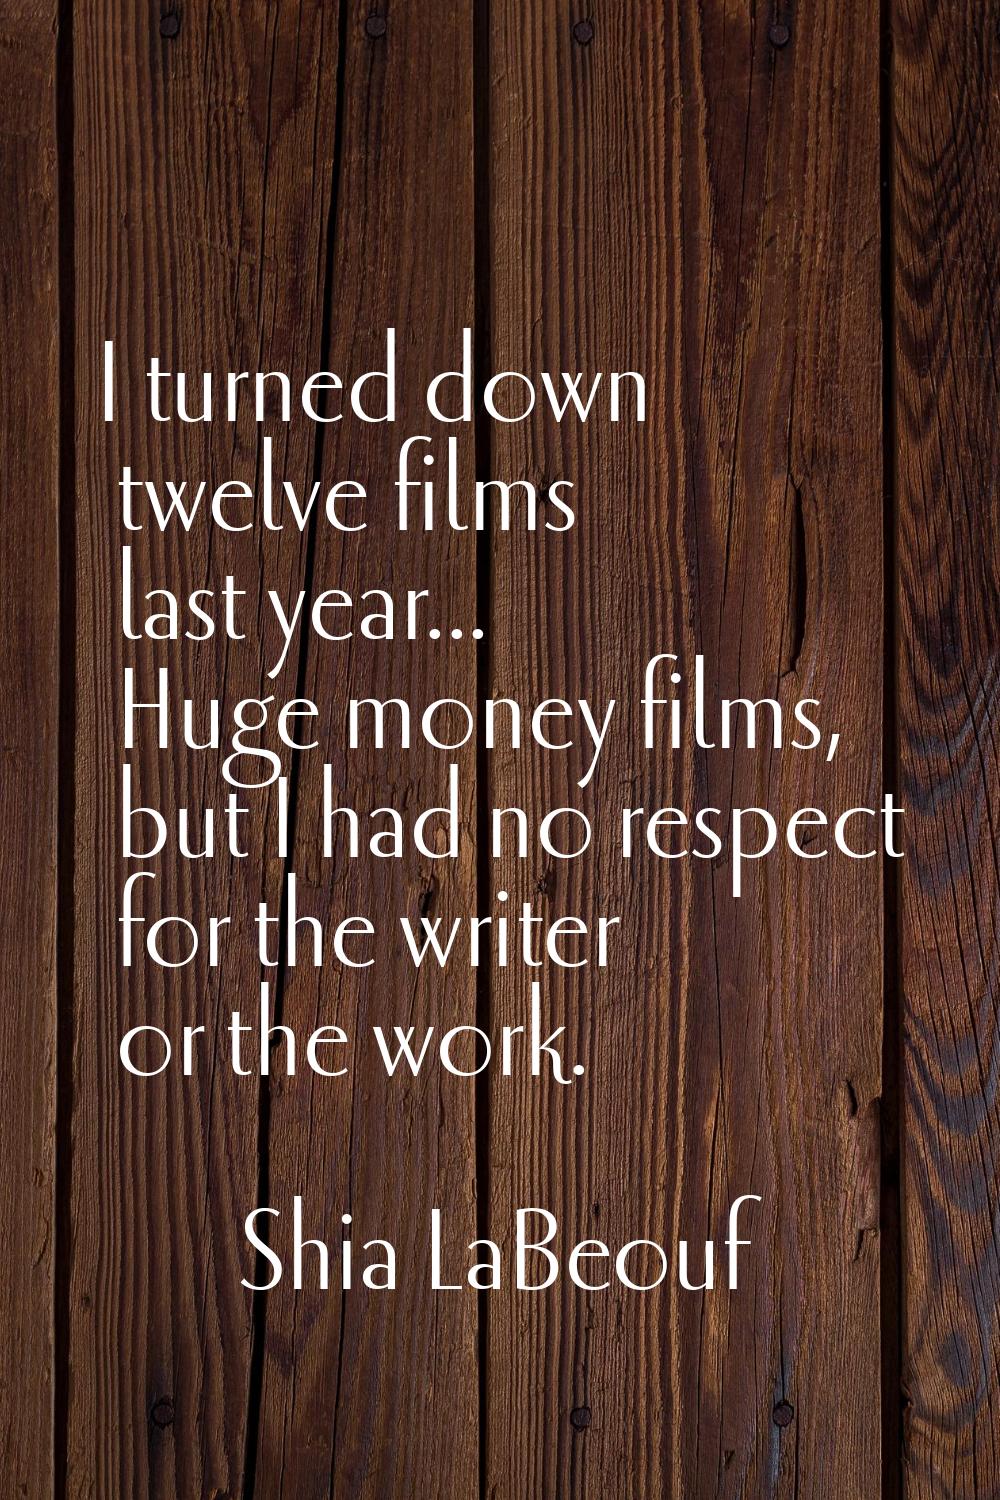 I turned down twelve films last year... Huge money films, but I had no respect for the writer or th